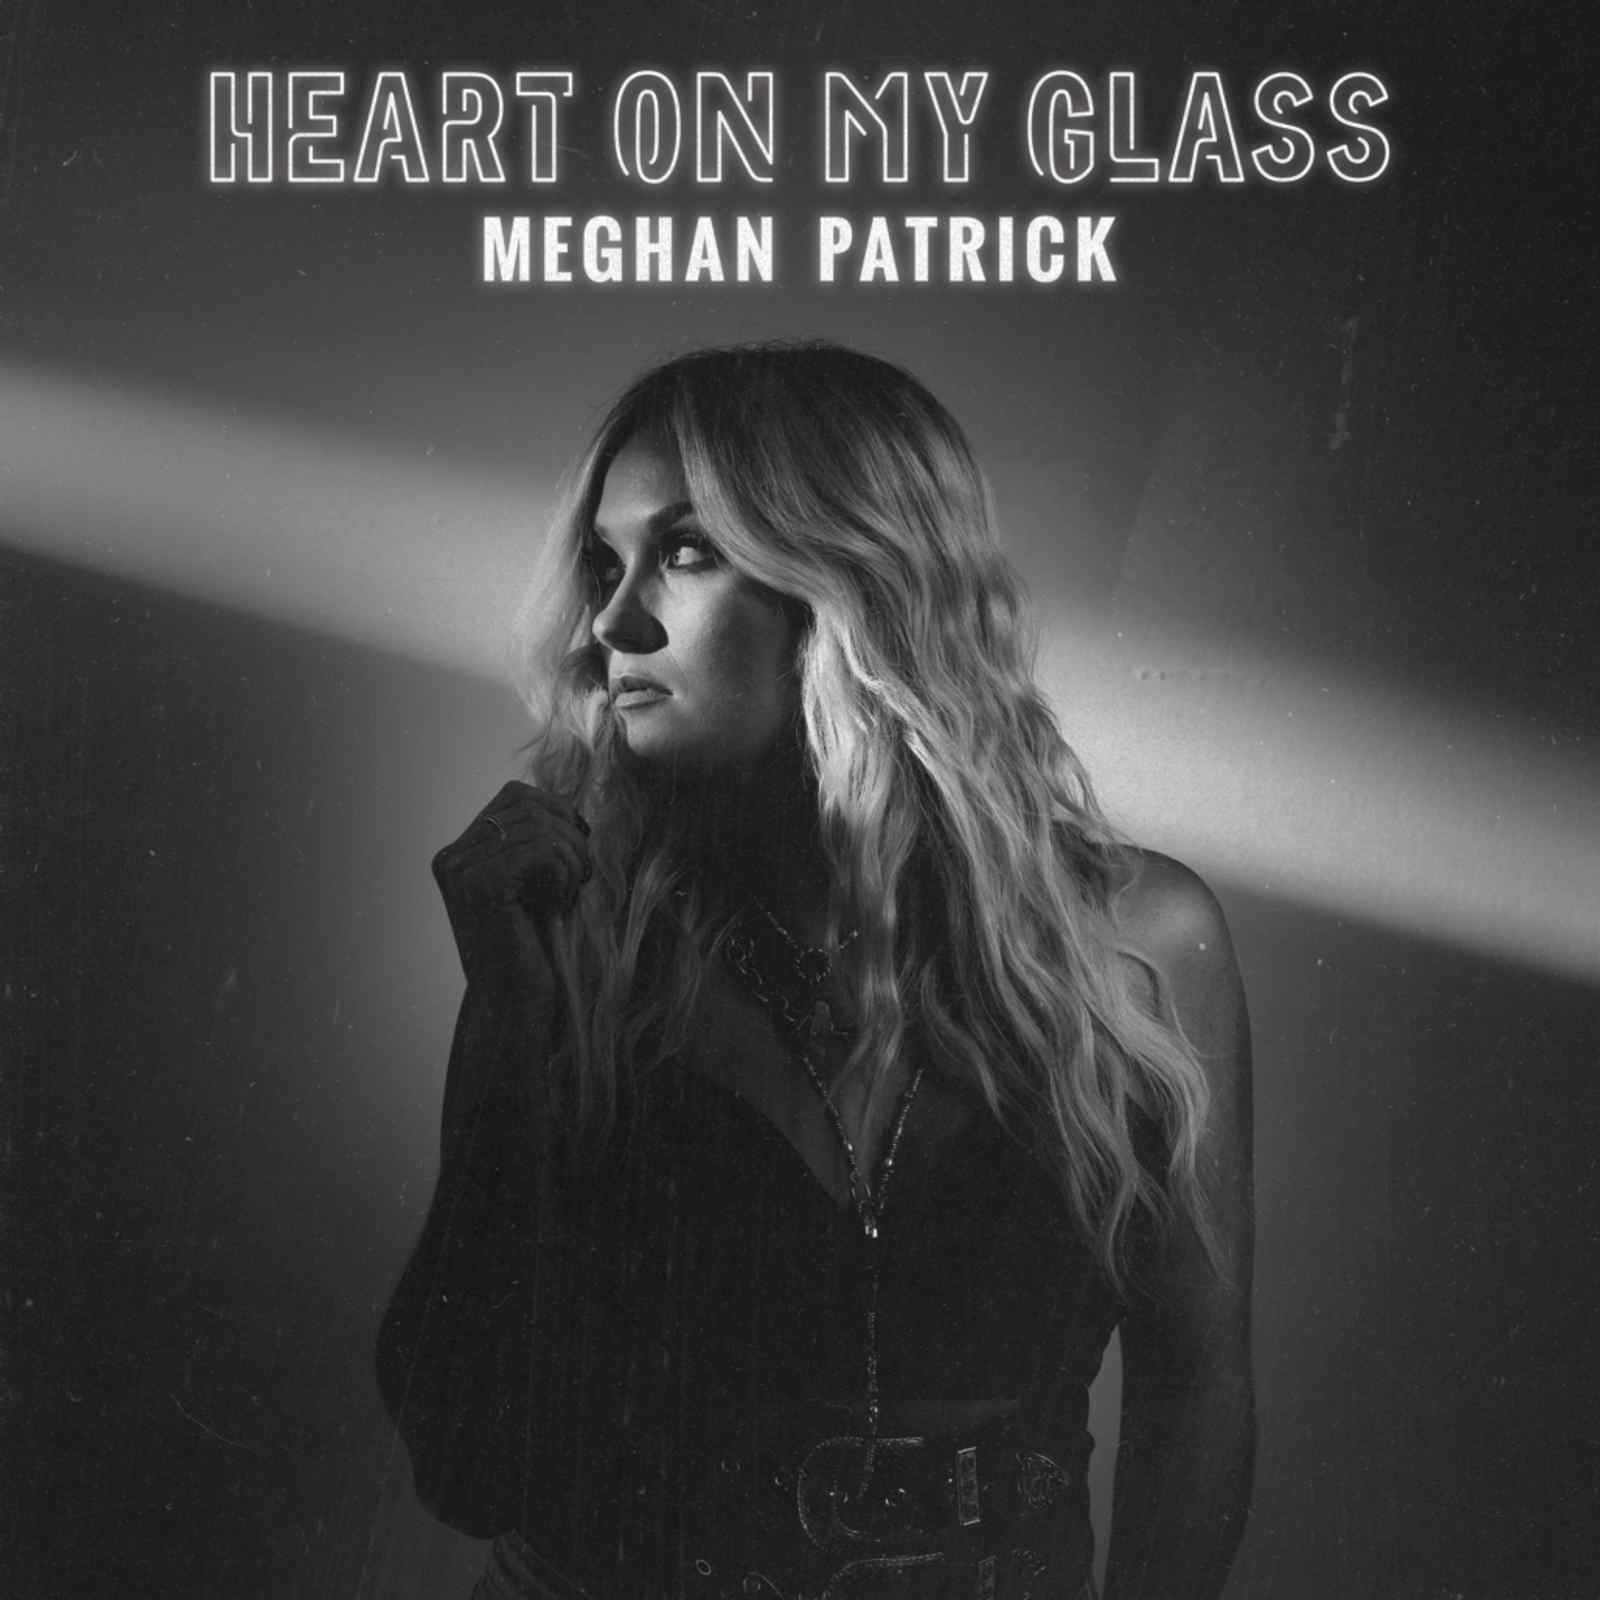 Heart On My Glass by Meghan Patrick